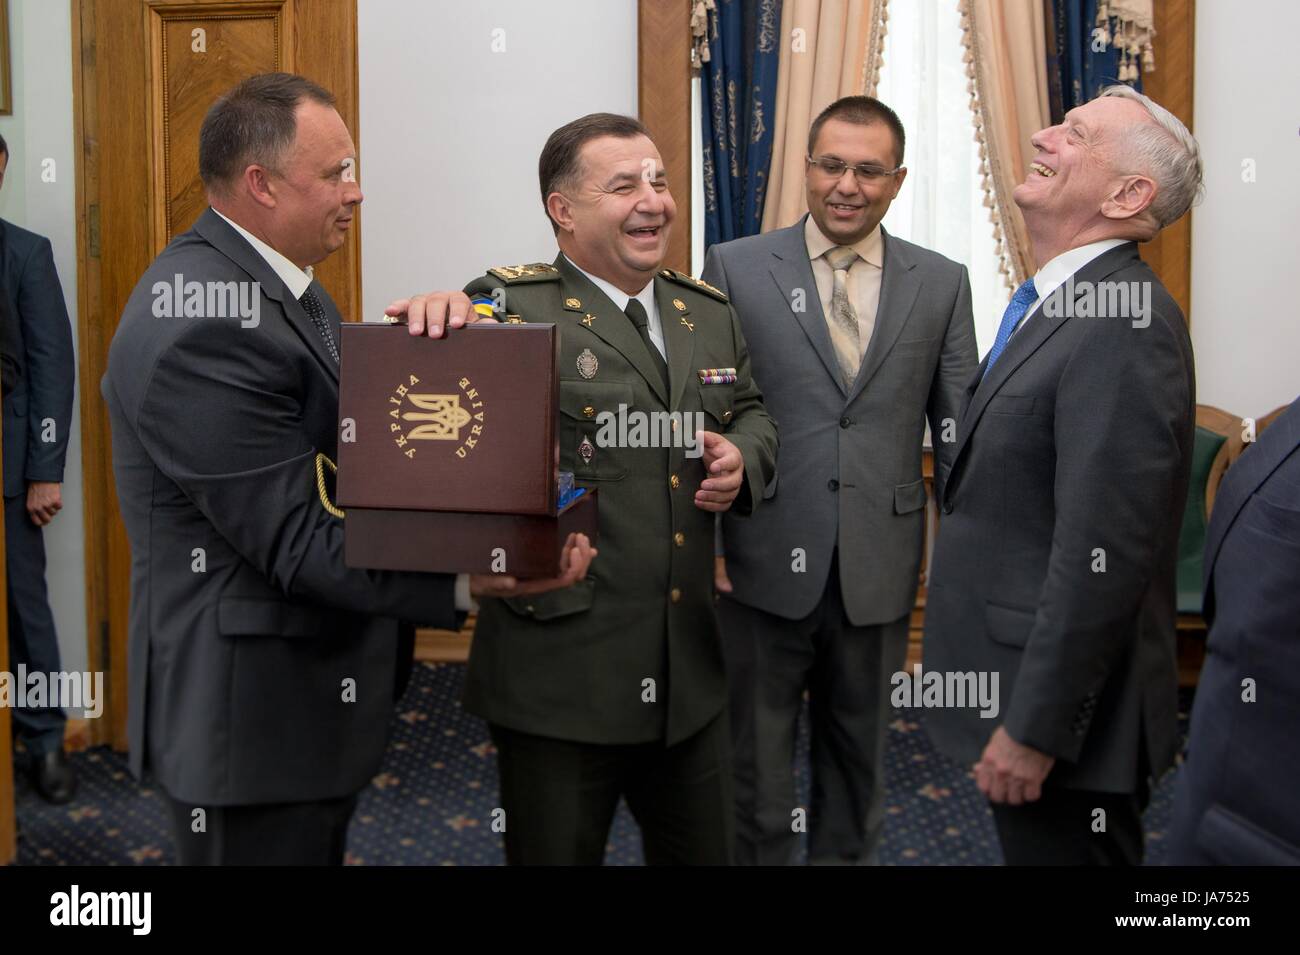 U.S. Secretary of Defense James Mattis, right, shares a laugh with Ukrainian Defense Minister Stepan Poltorak, center, during an exchange of gifts at the Ministry of Defense August 24, 2017 in Kyiv, Ukraine Stock Photo